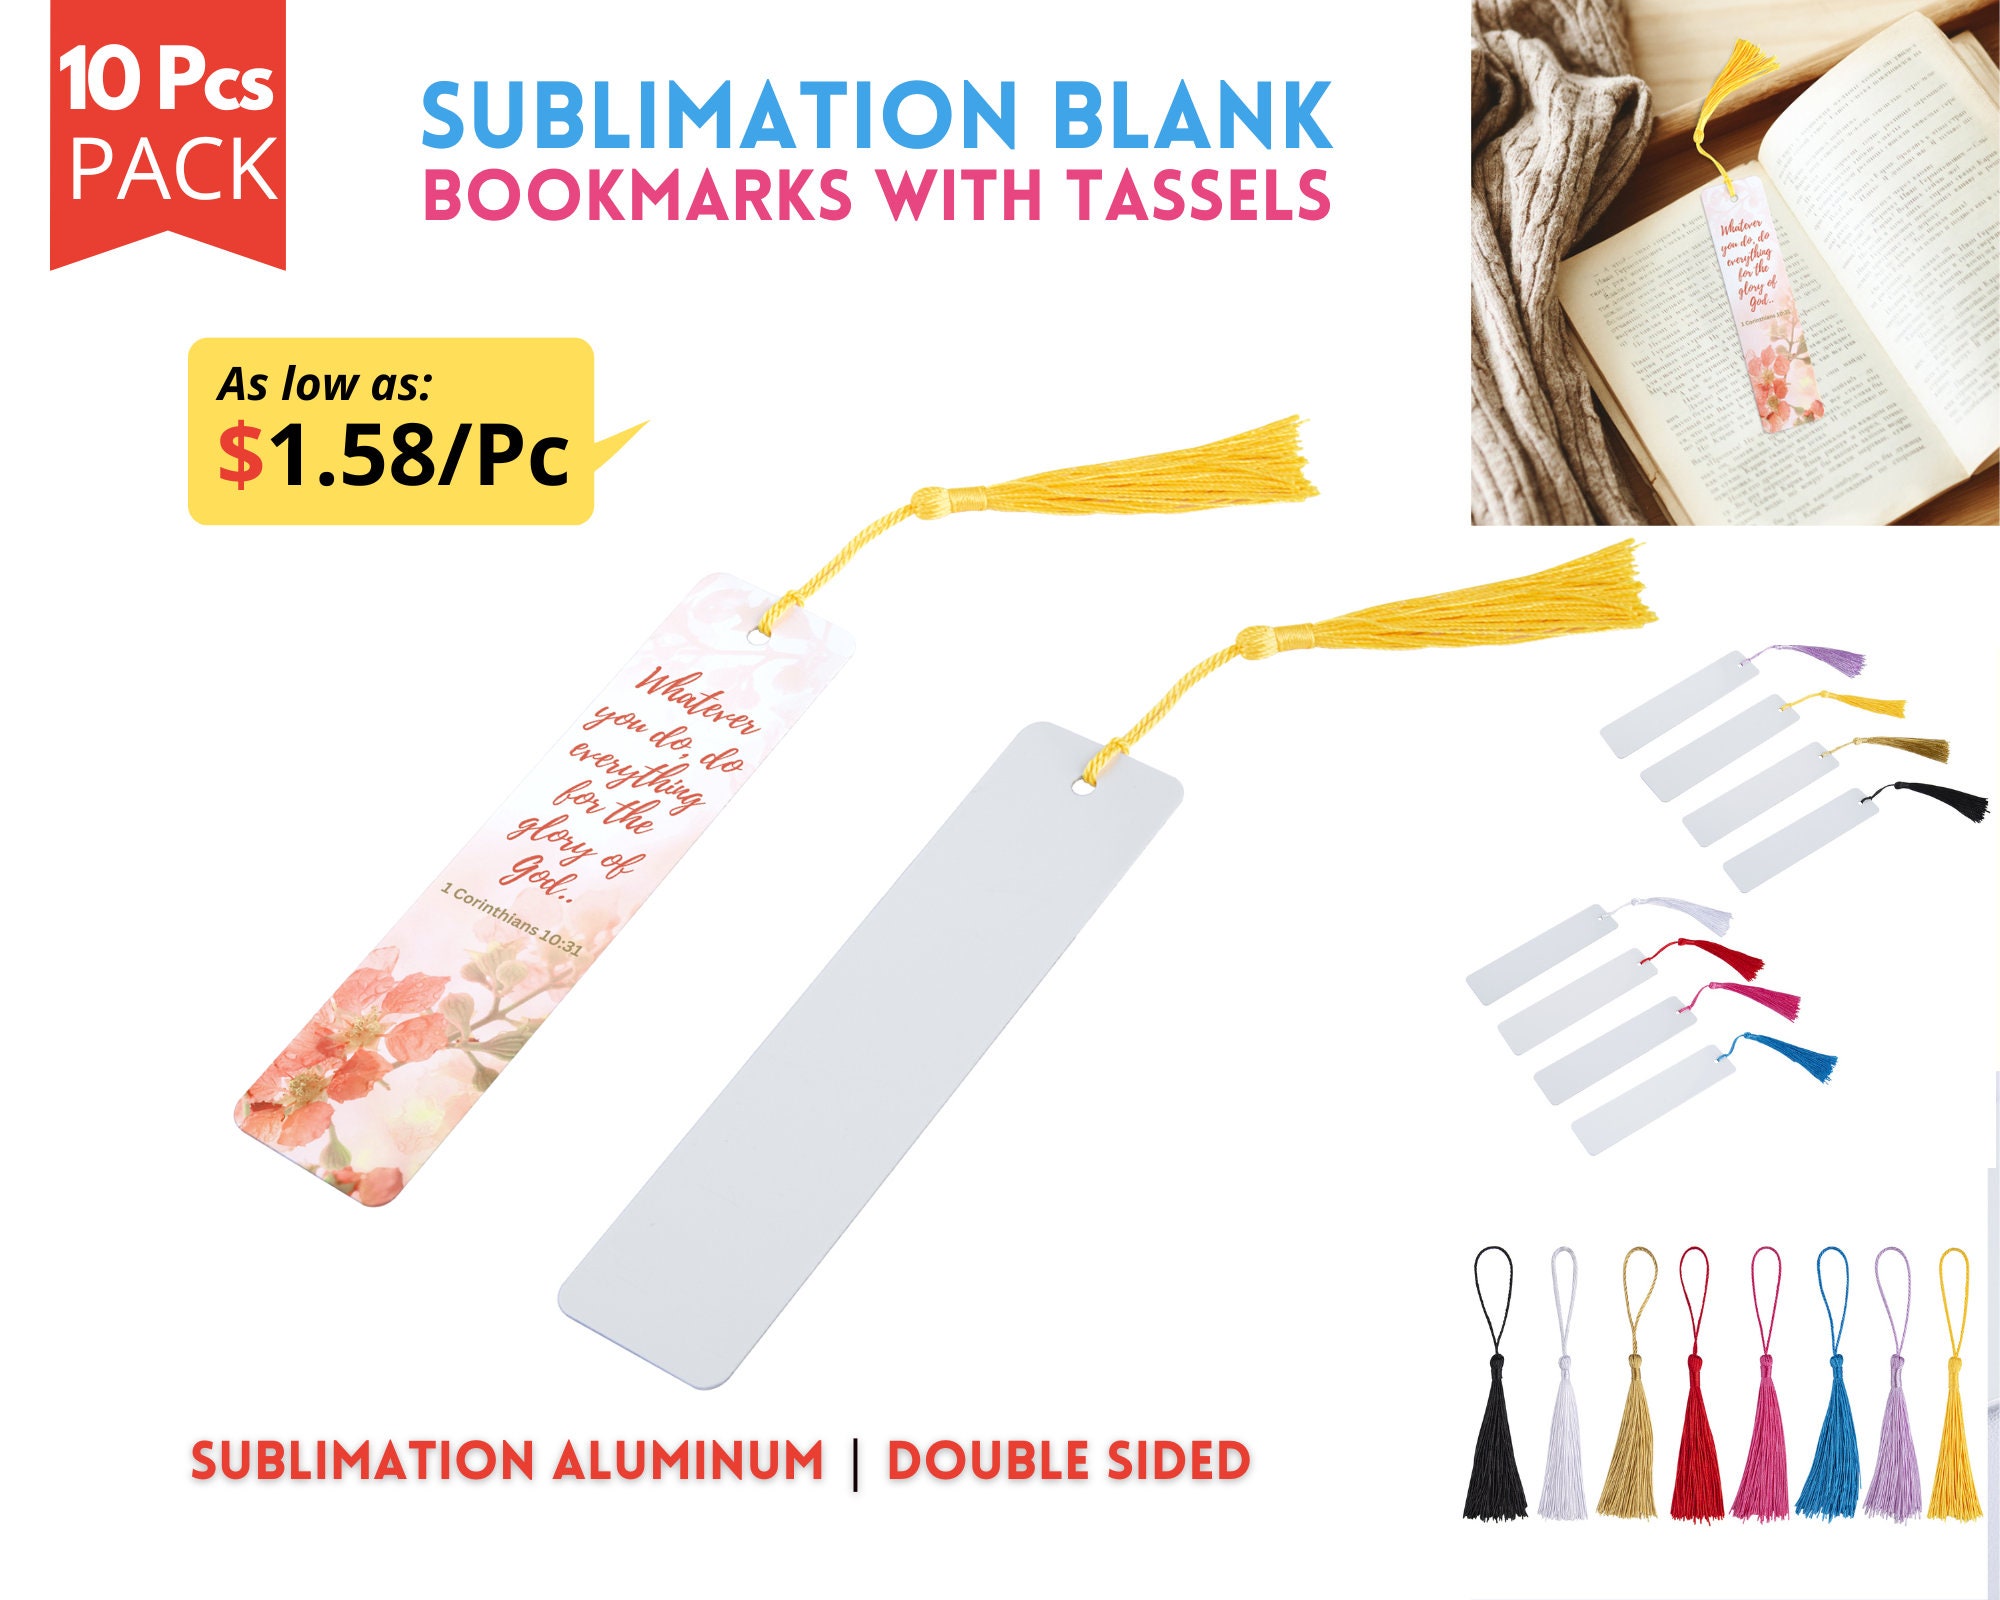 10x Sublimation Bookmarks Blanks High Gloss Double Sided Aluminum  Sublimation Blank Book Mark With Tassels Available in 8 Colors 